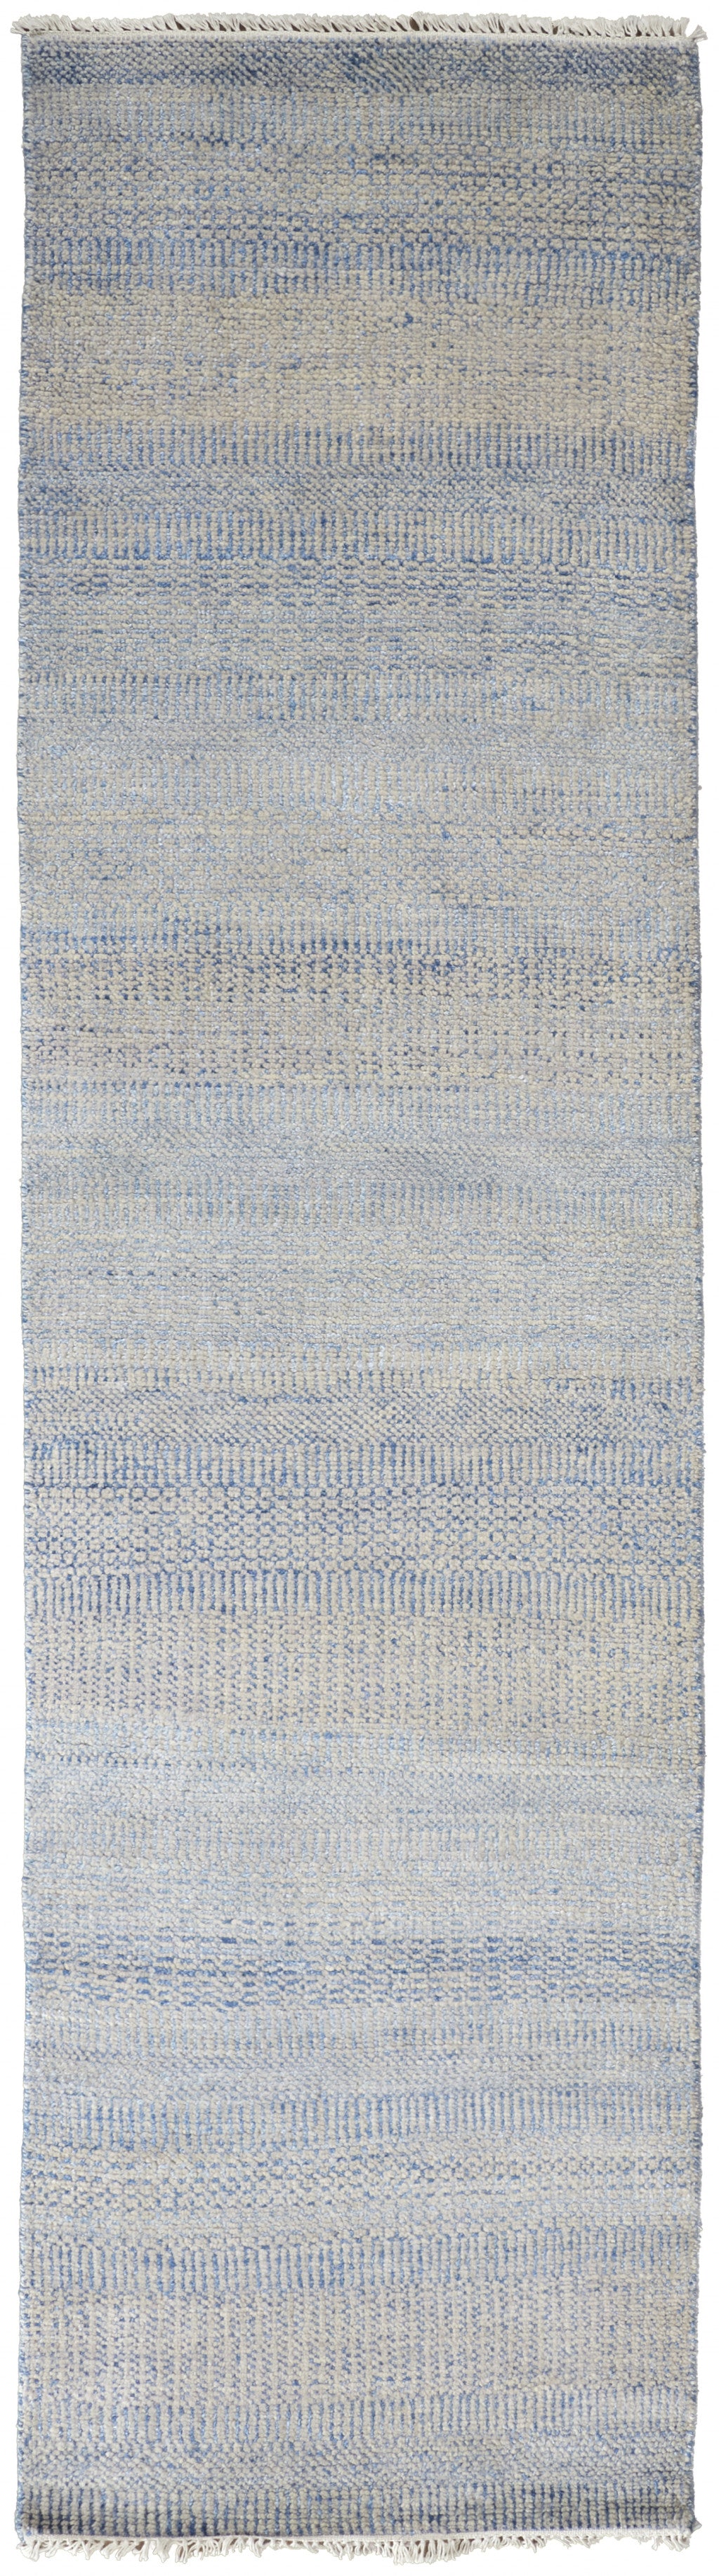 8' x 10' Blue and Silver Wool Striped Hand KNotted Area Rug